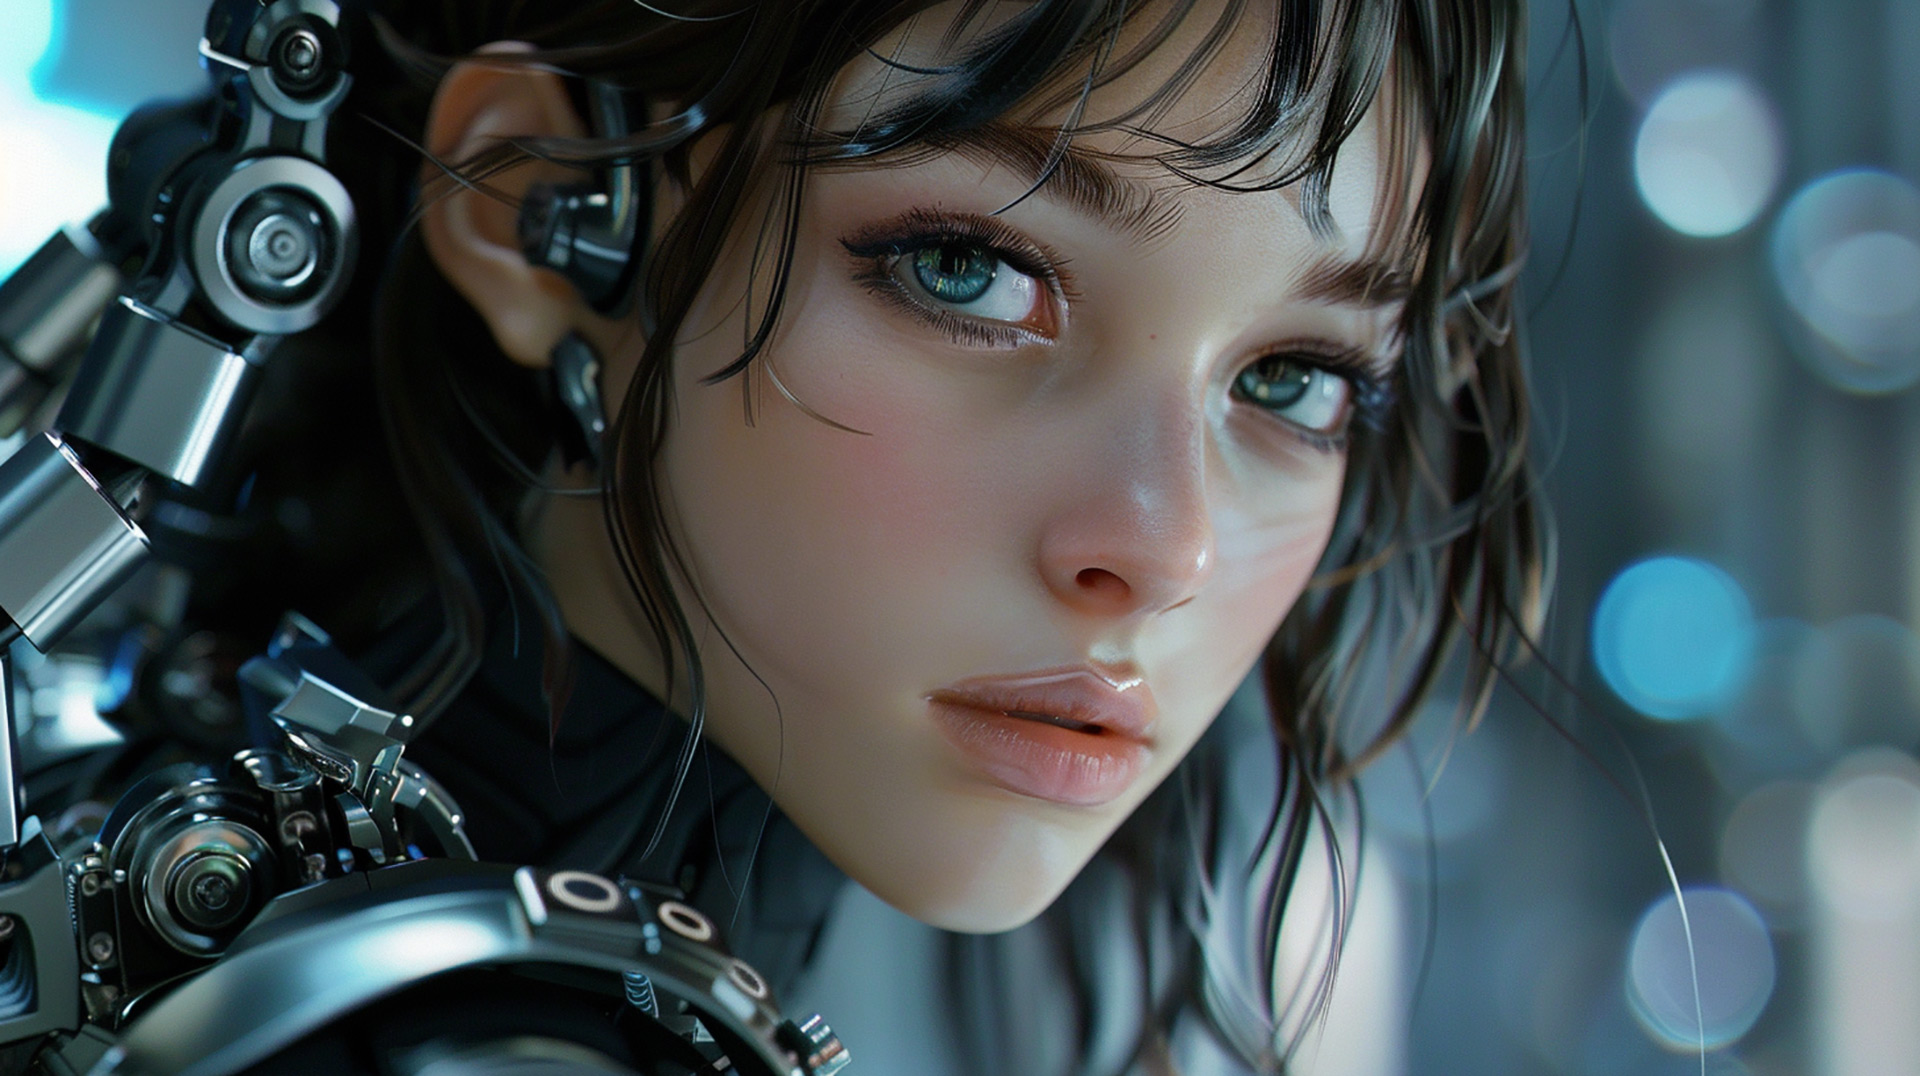 Proto Princess: Early Model Robot Girl Wallpapers for Download